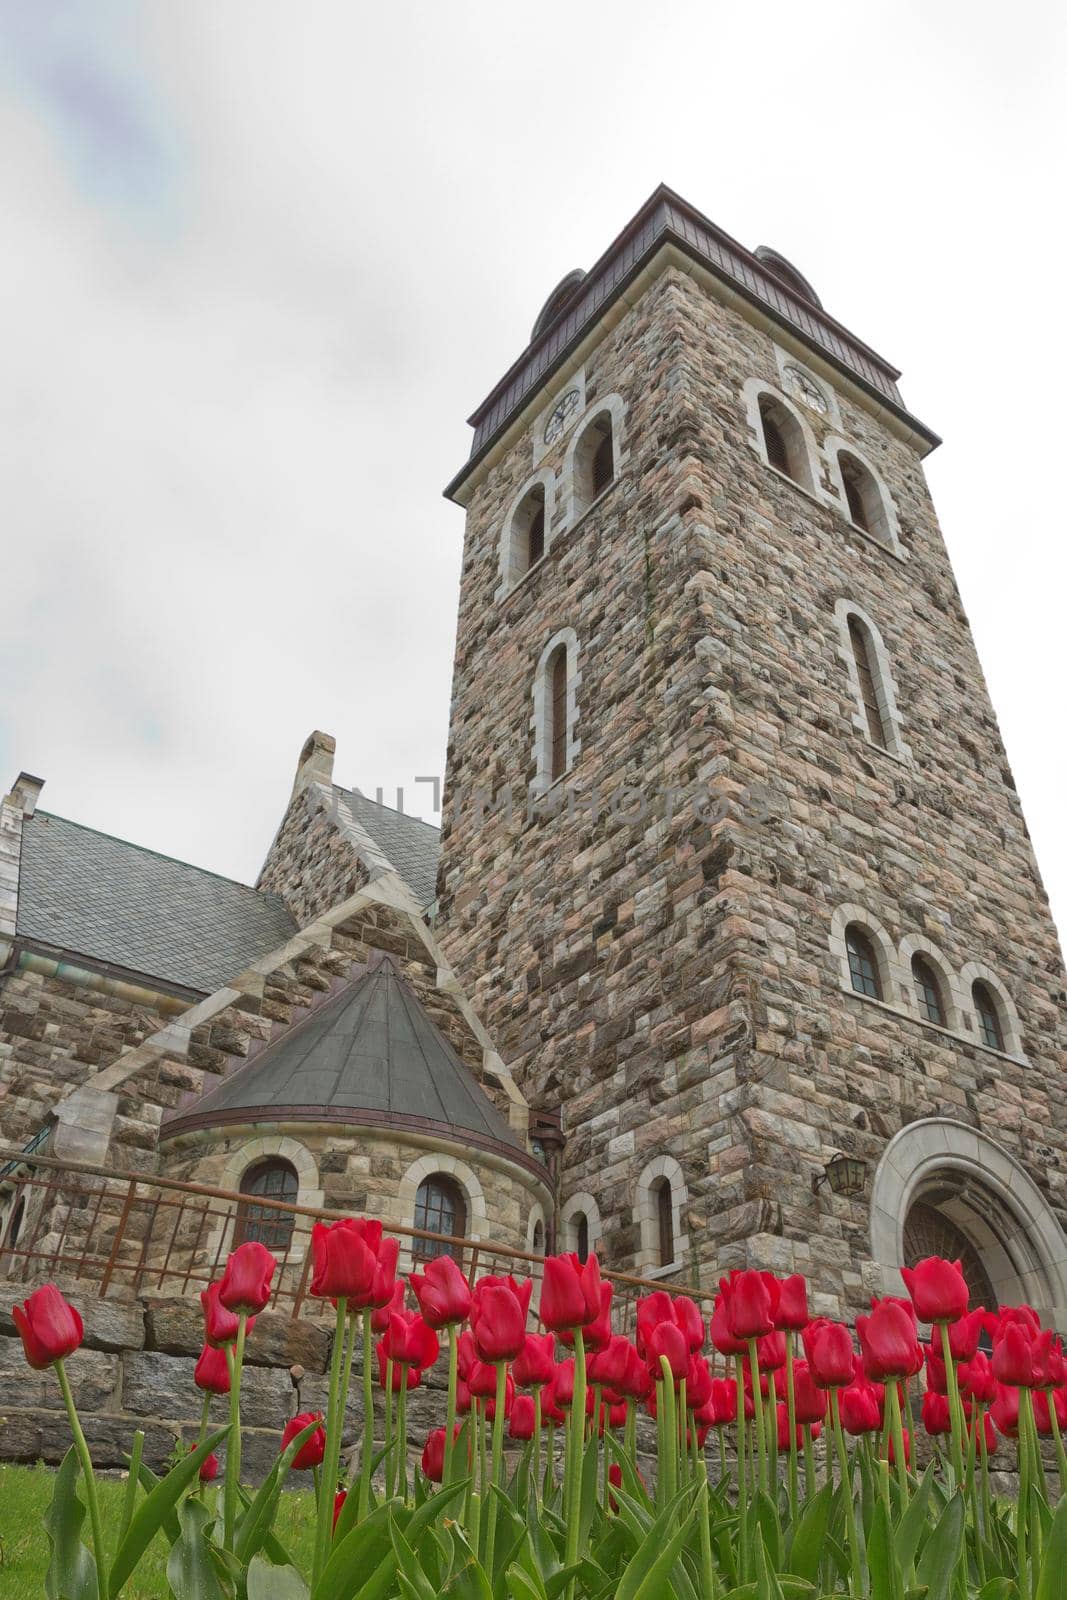 View of a historical stone church in Alesund Norway with red tulips in the foreground by wondry